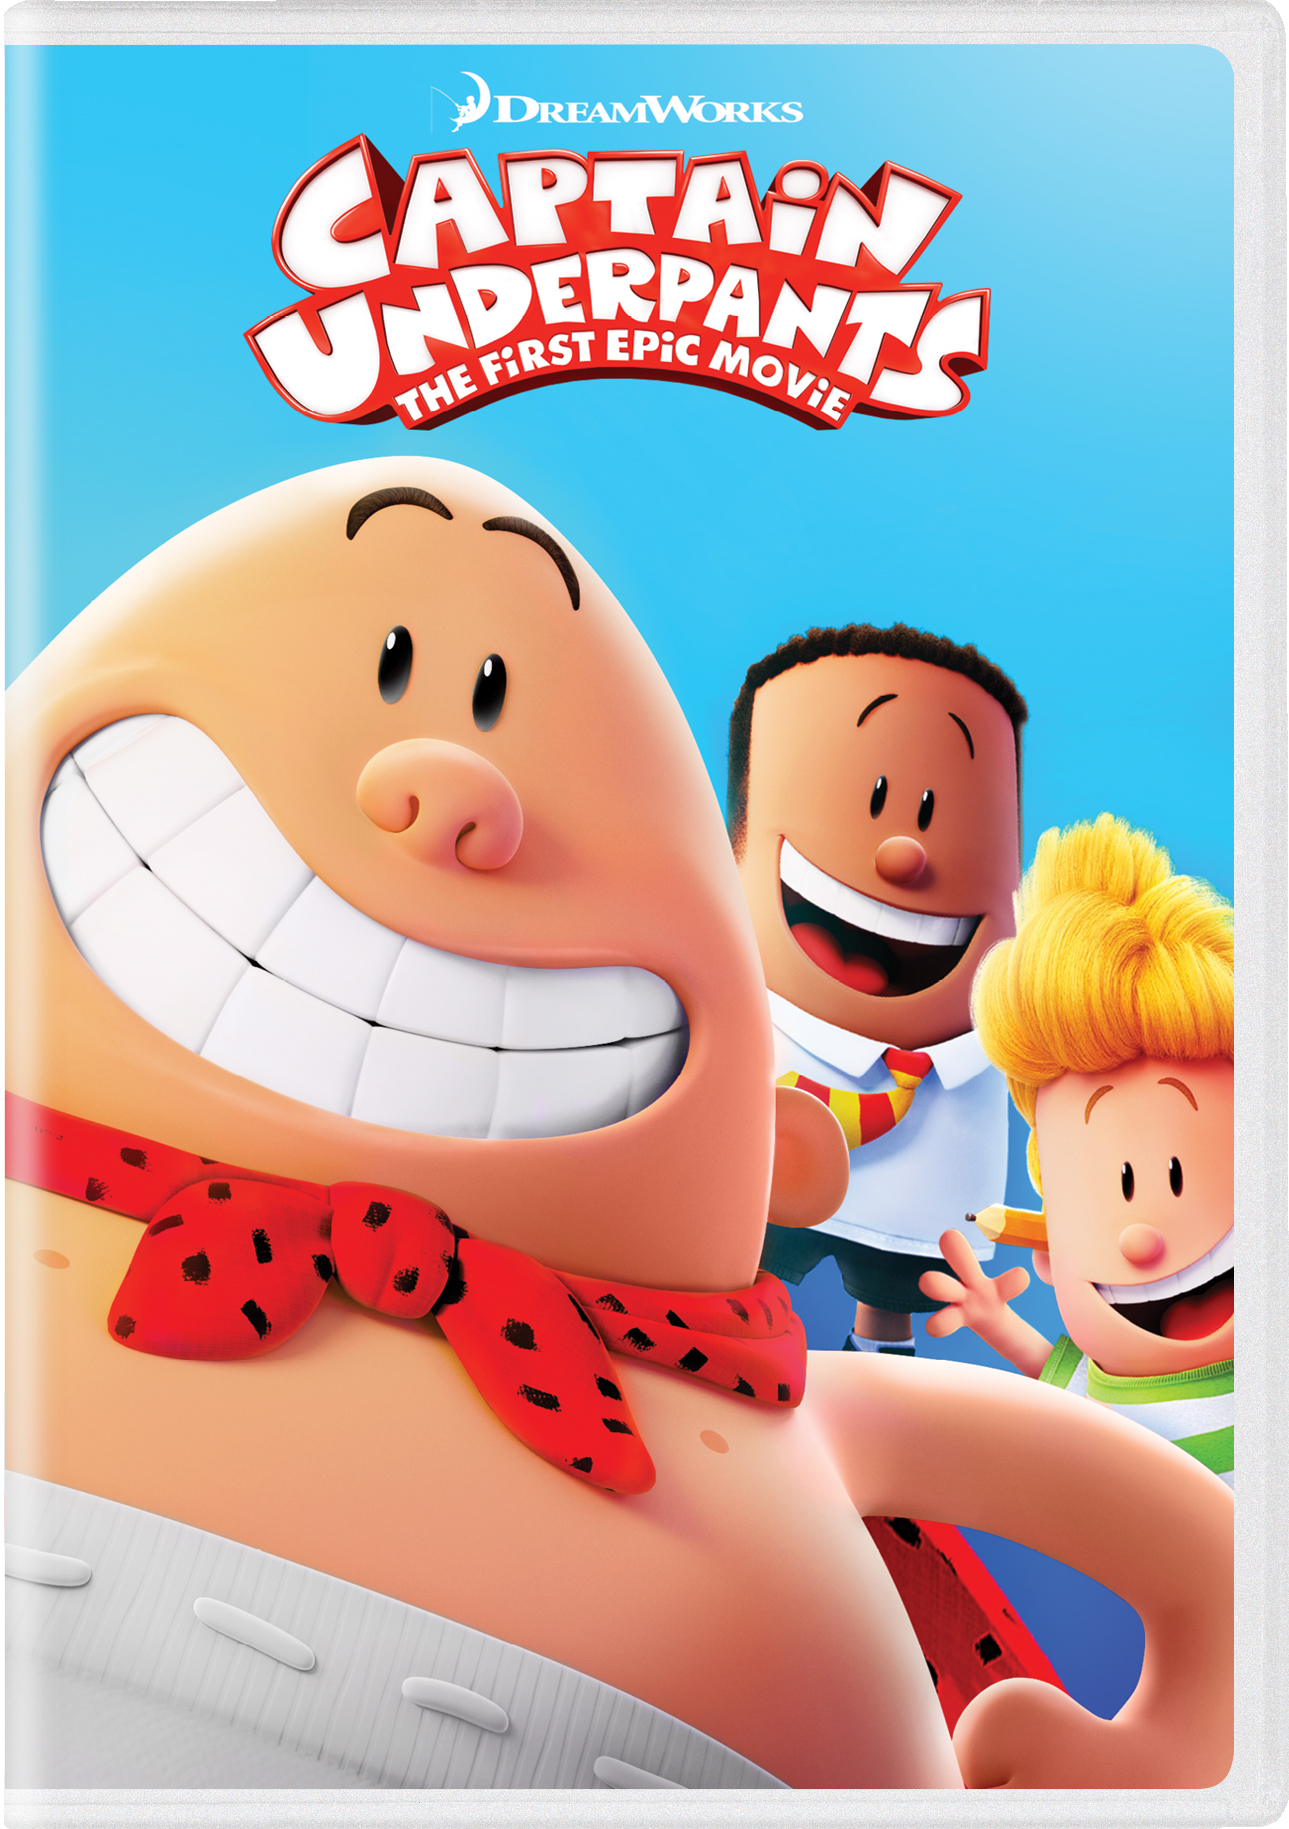 Captain Underpants: The First Epic Movie (New Artwork) - DVD [ 2017 ]  - Children Movies On DVD - Movies On GRUV